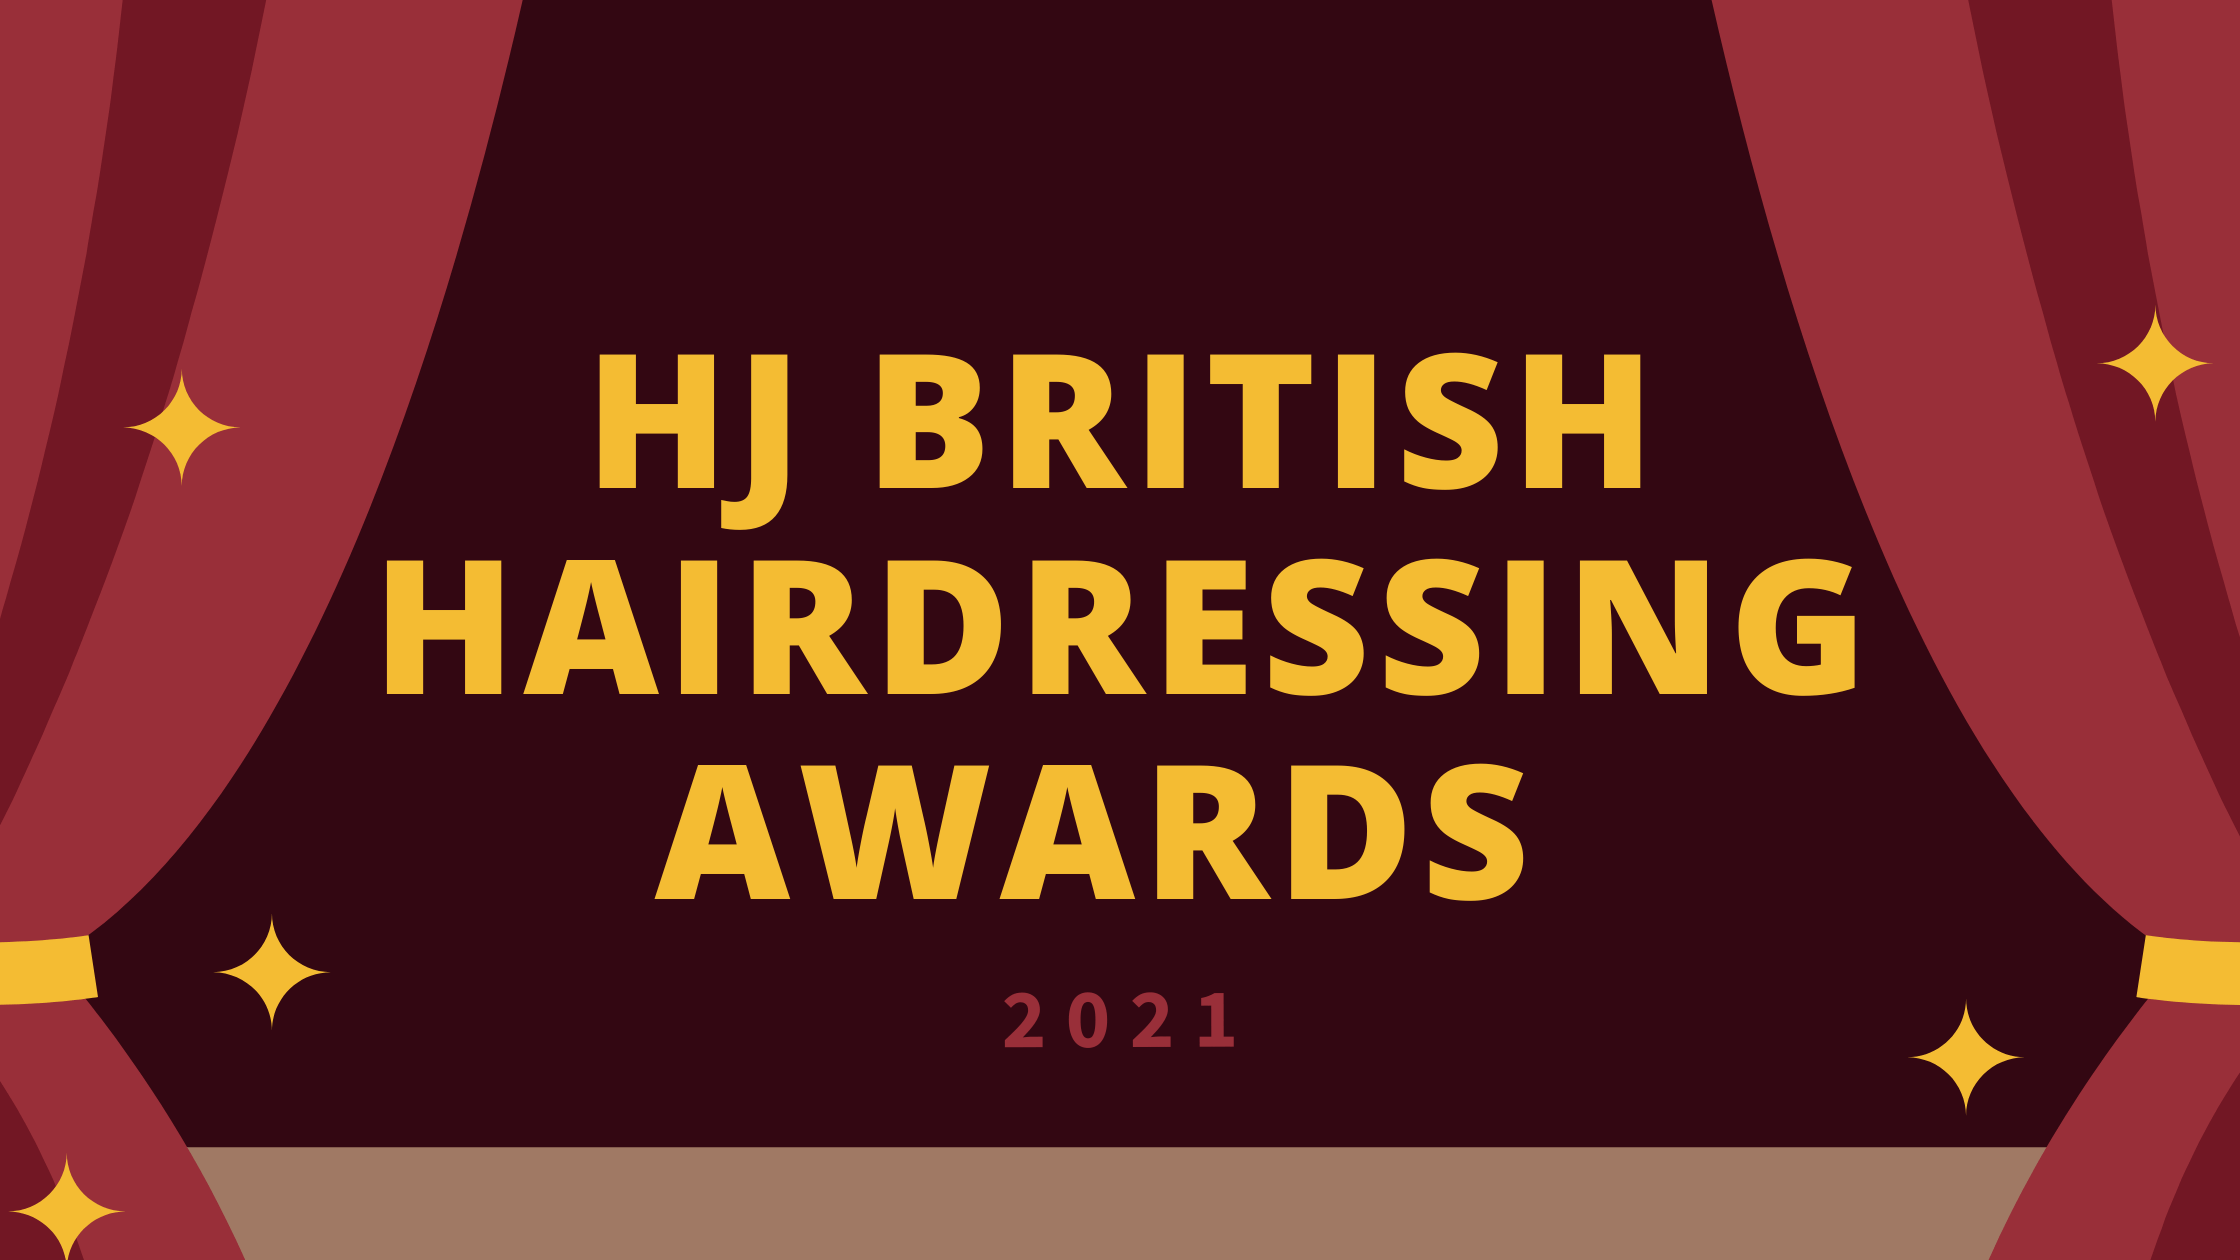 Easydry supports the HJ British Hairdressing Awards